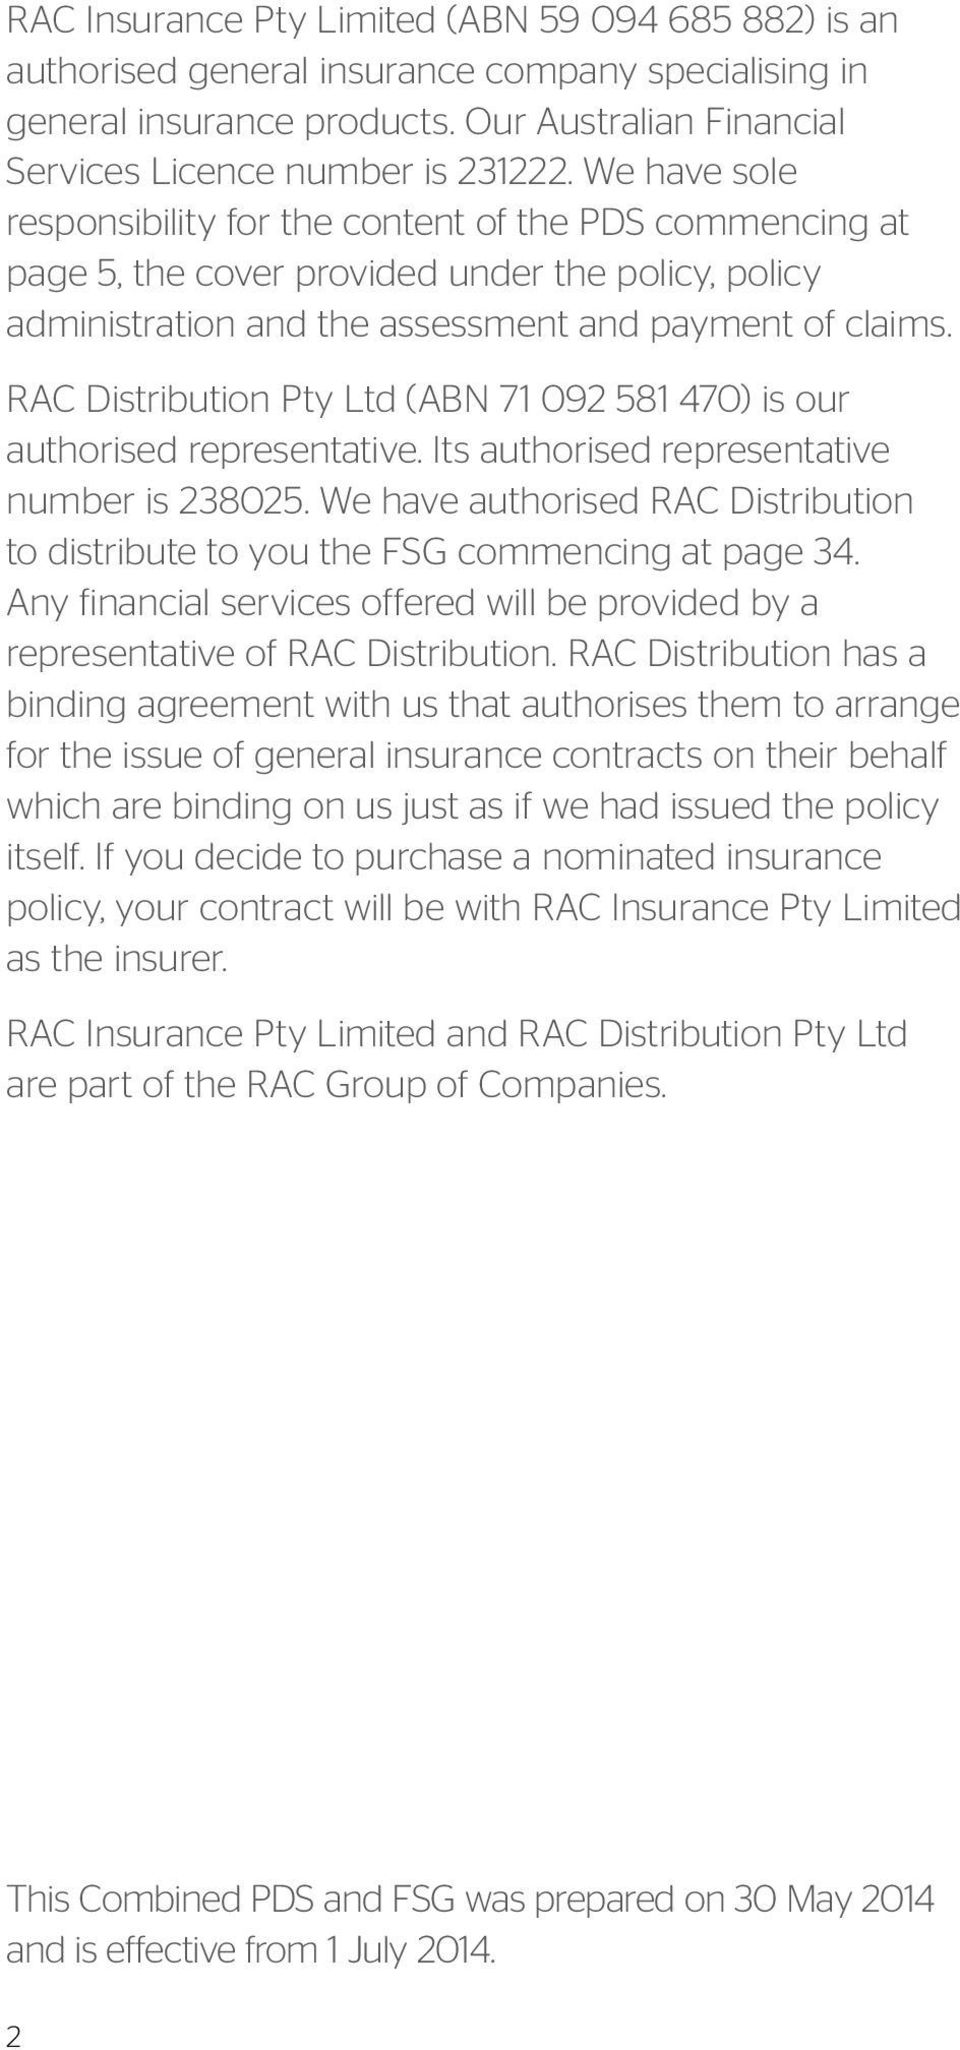 RAC Distribution Pty Ltd (ABN 71 092 581 470) is our authorised representative. Its authorised representative number is 238025.